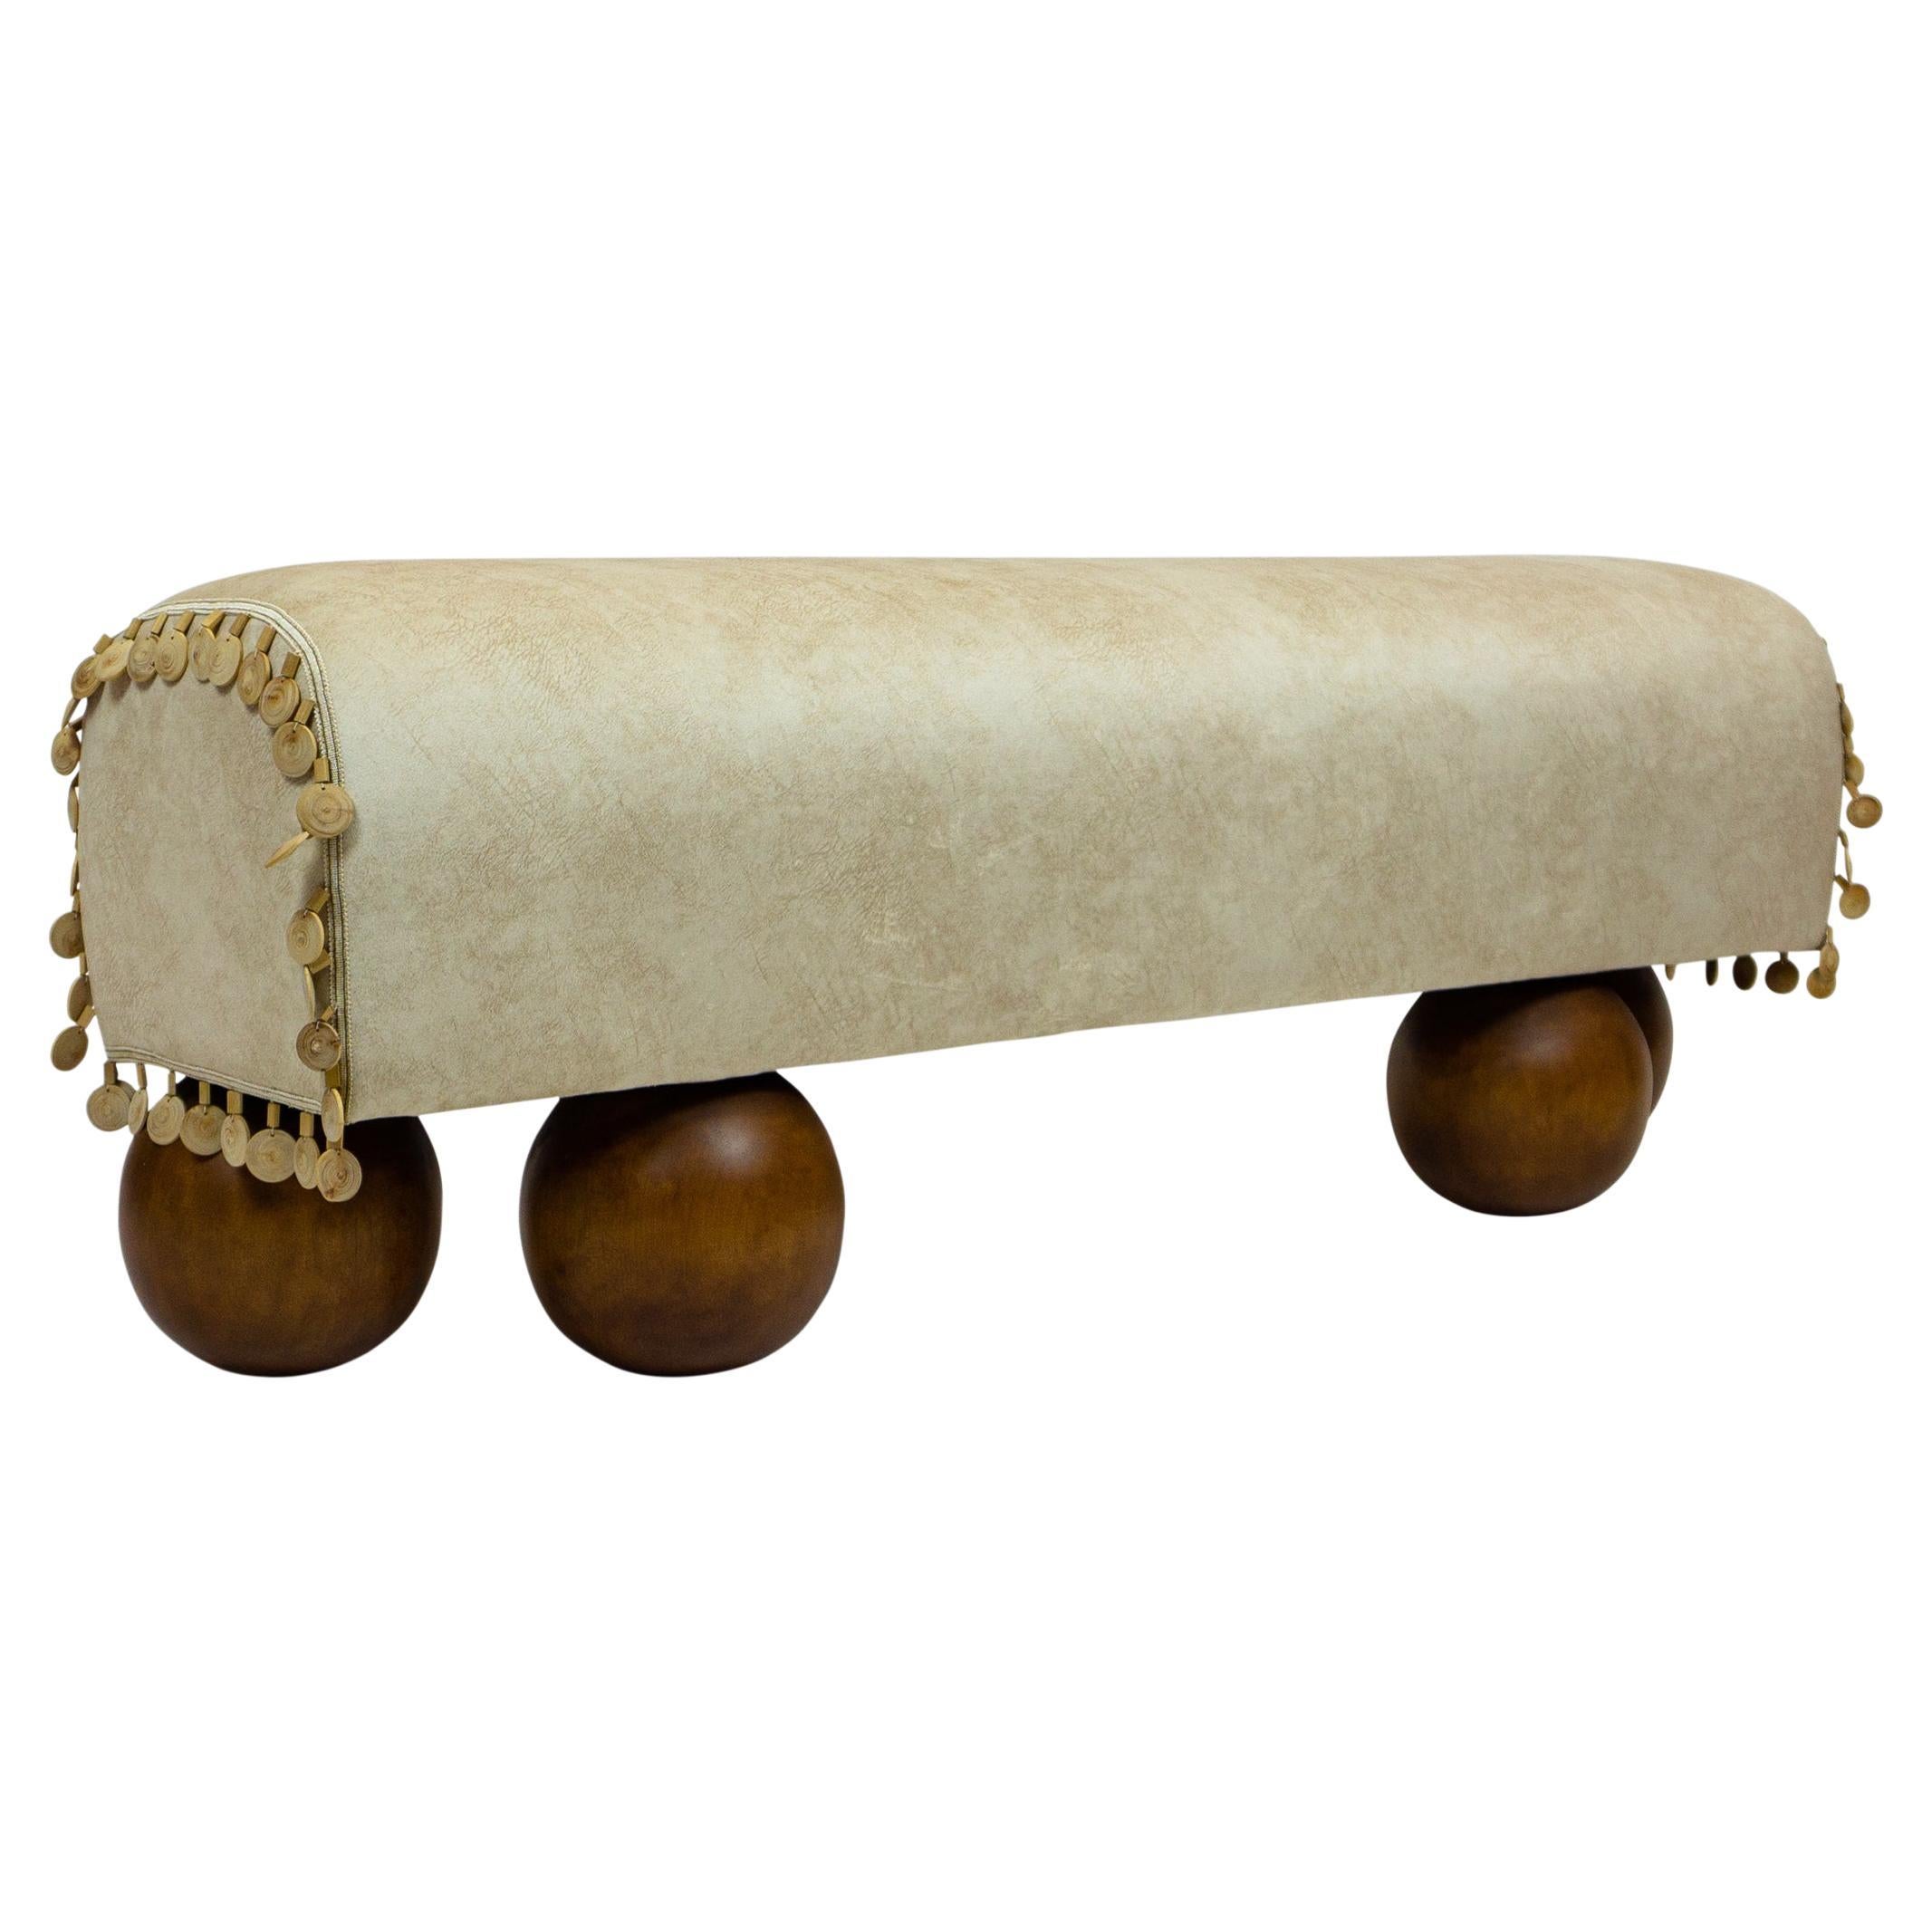 Modern, organic style bench with ball / sphere feet of solid walnut. Saddle shaped seat and upholstered with eight-way hand-tied springs and high density foam. Upholstered with 